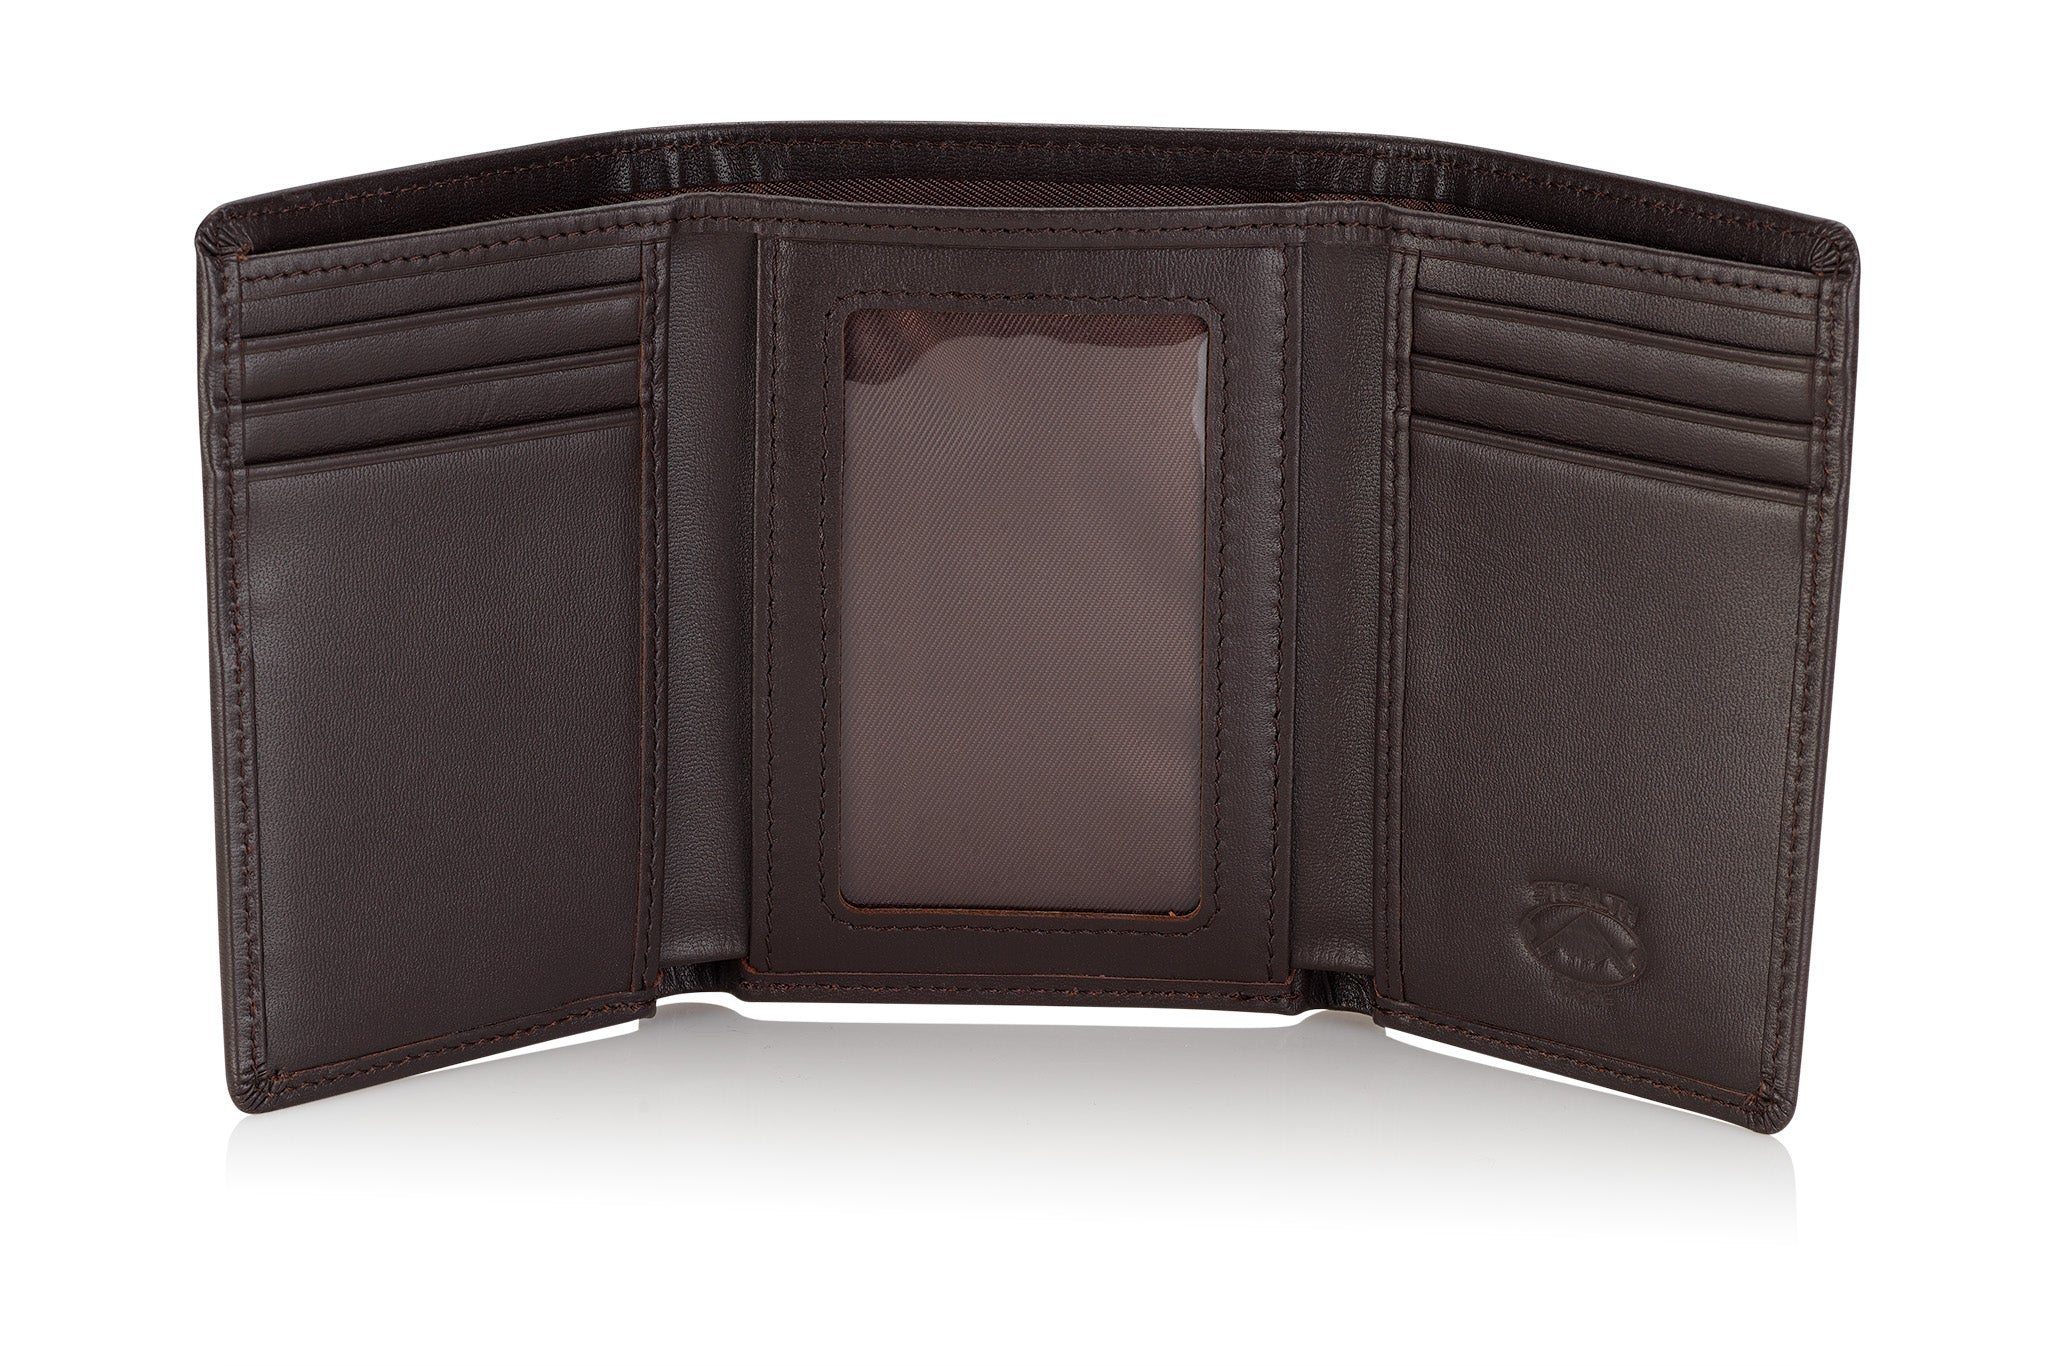 Stealth Mode Men's Leather Trifold Wallet with Airtag Holder and RFID Blocking (Coffee)